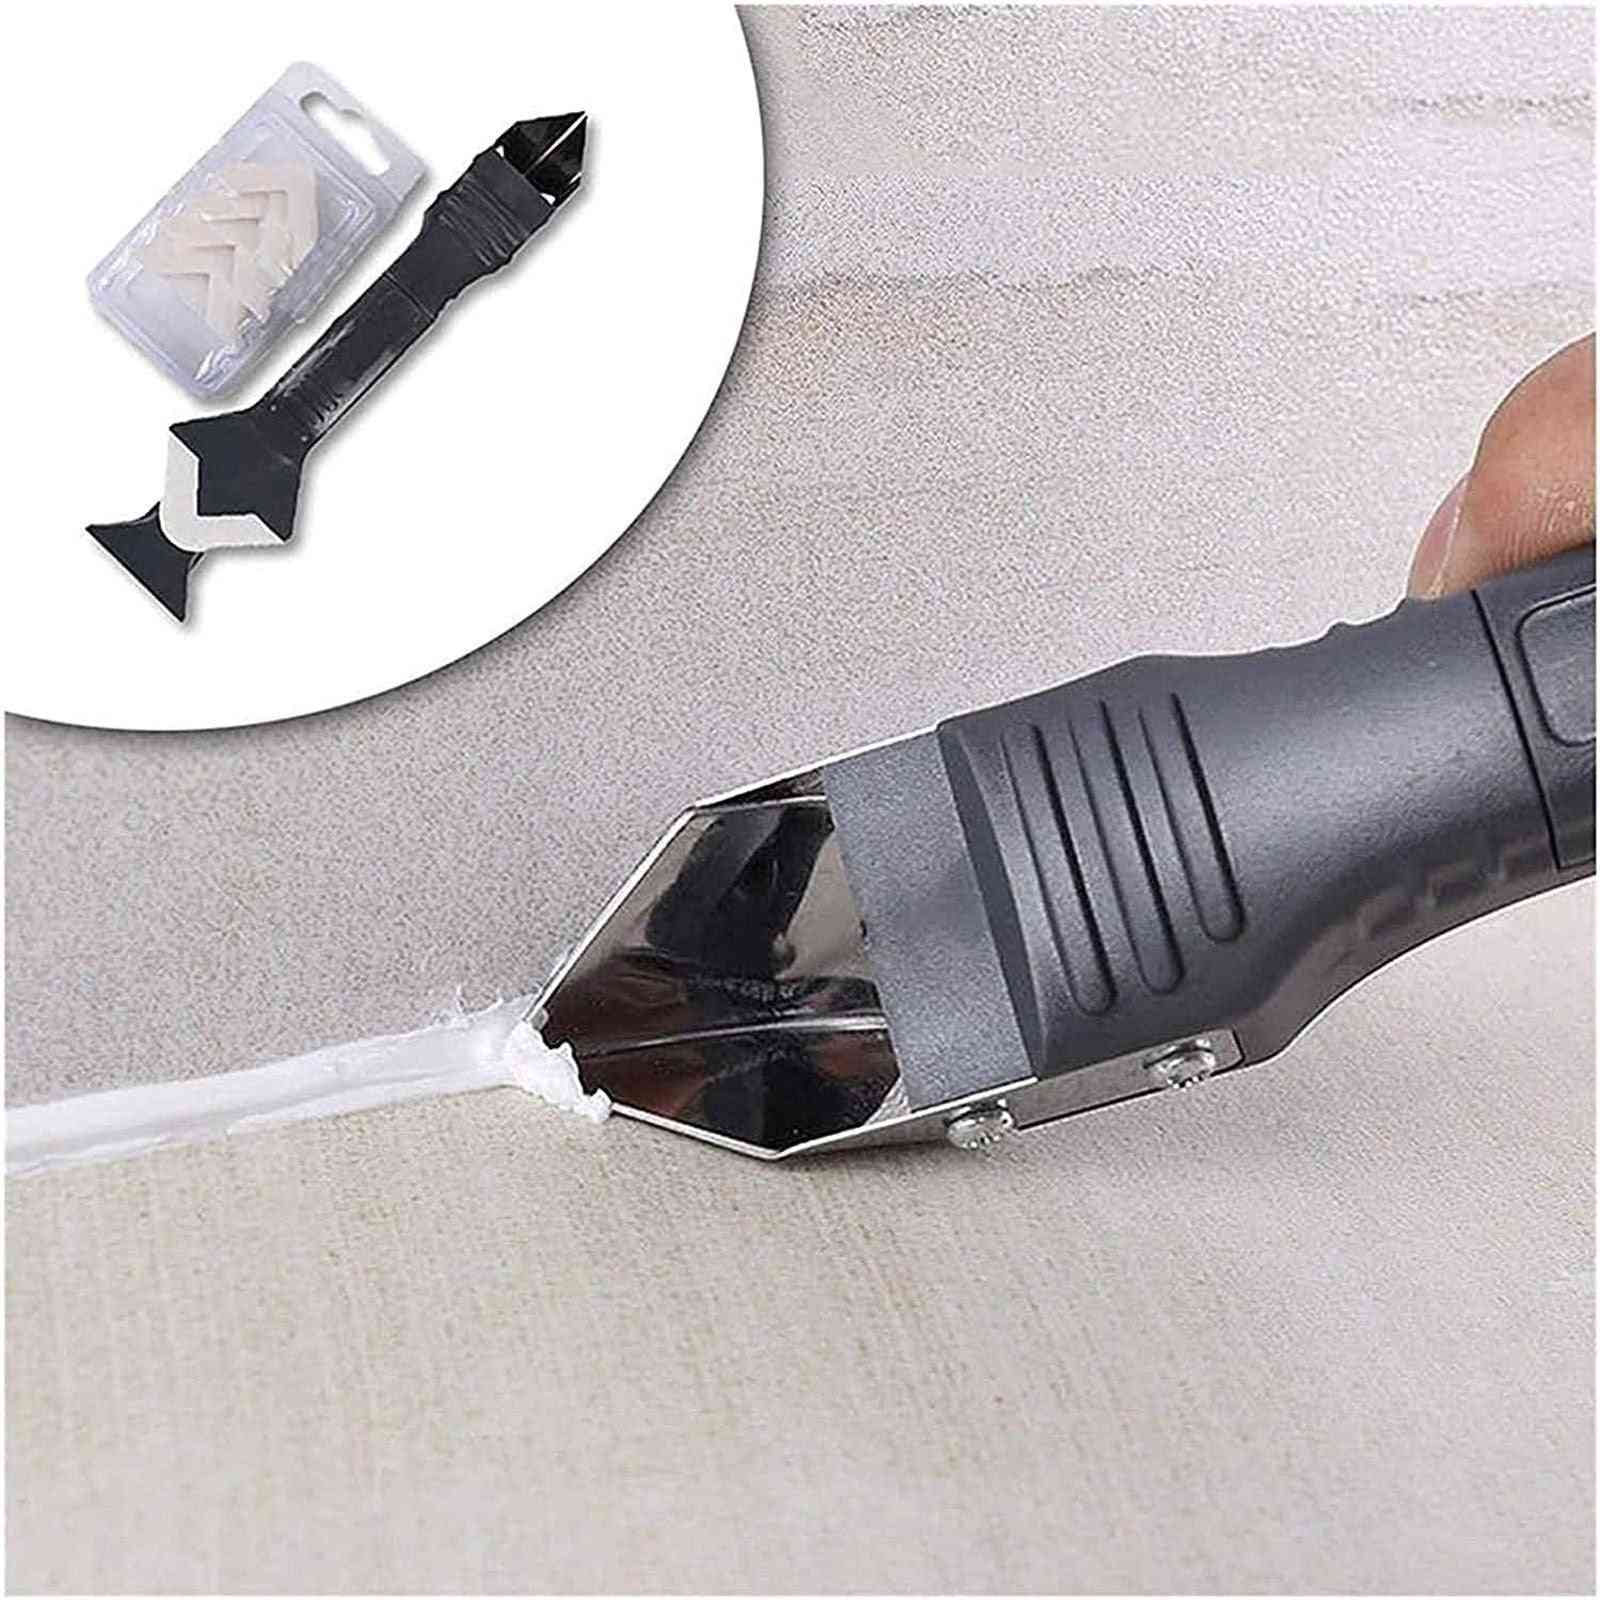 5 In1 Silicone Trowel And Scrapper